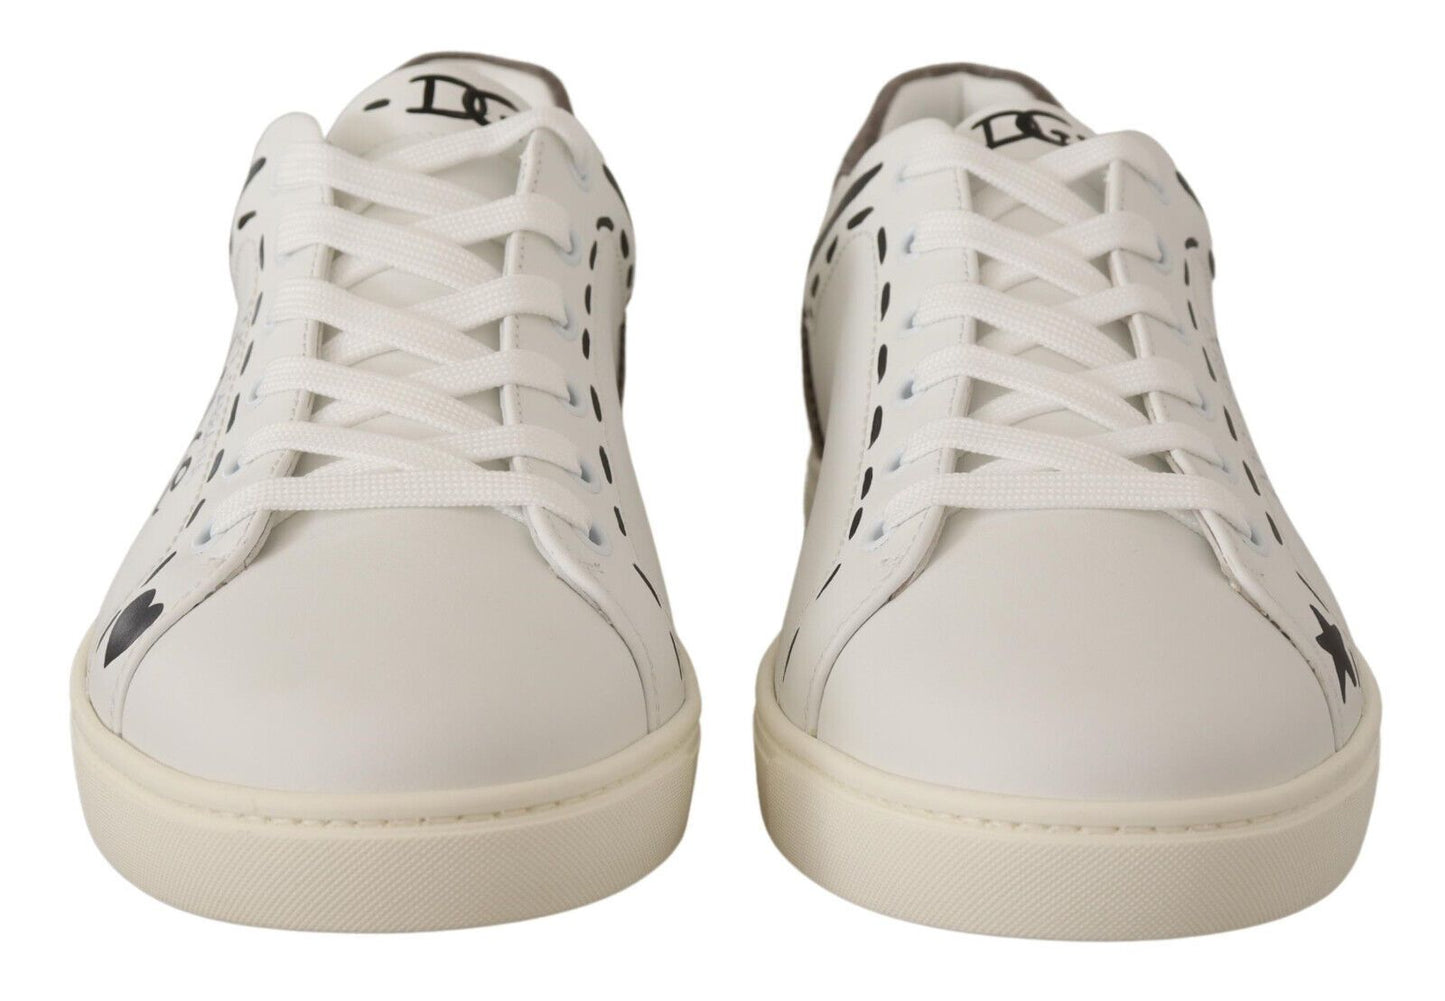 Dolce & Gabbana Elegant White Leather Casual Sneakers